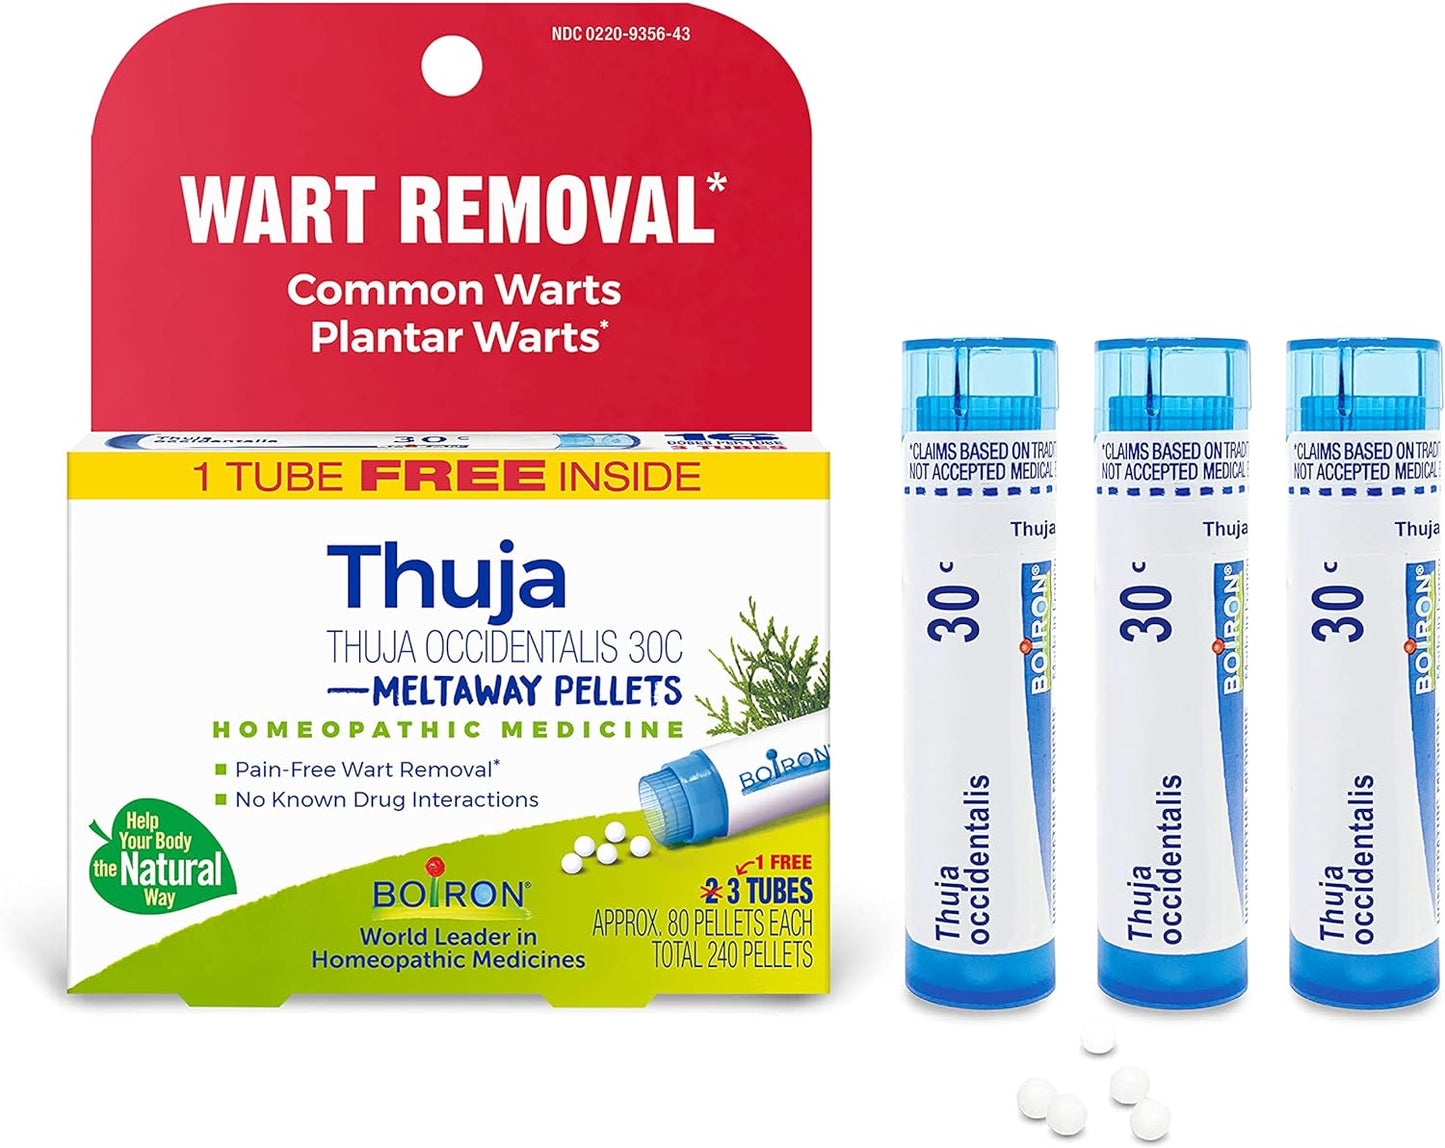 Boiron Thuja Occidentalis 30C Wart Removal Homeopathic Medicine  - 80 Count (Pack of 3)